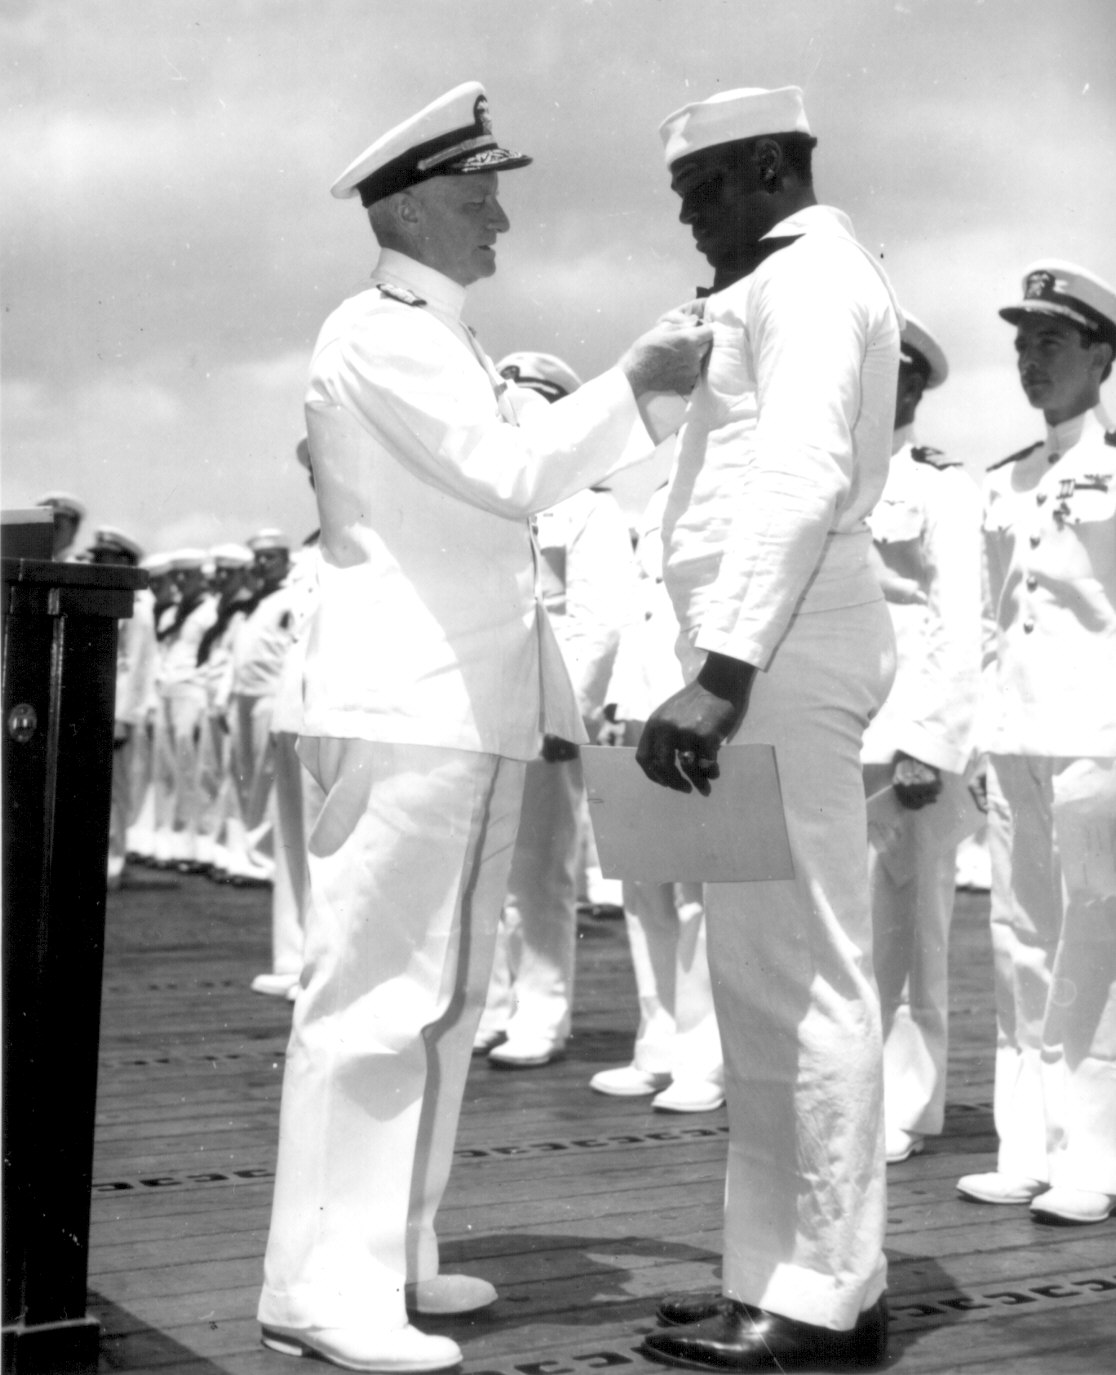 Doris Miller receiving the Navy Cross award from Admiral Chester Nimitz, onboard carrier Enterprise, Pearl Harbor, US Territory of Hawaii, 27 May 1942; photo 2 of 2